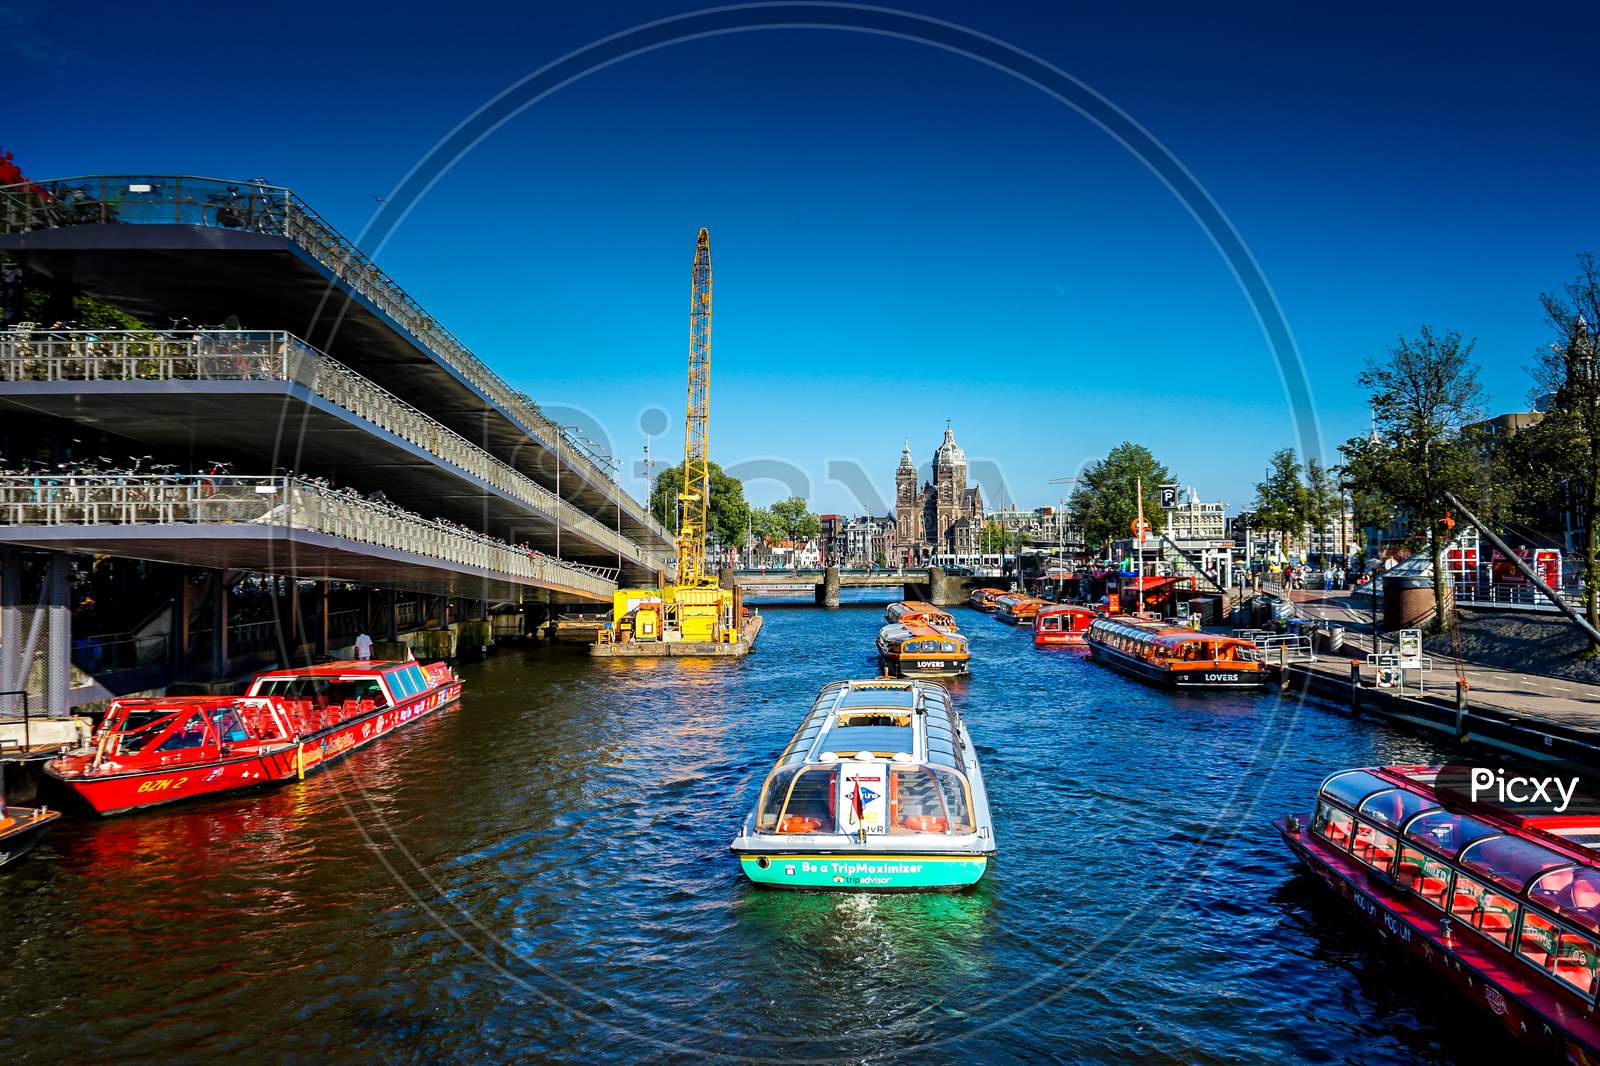 Netherlands, Amsterdam - 22 July 2018: Boat On Canal Cruise At Amsterdam